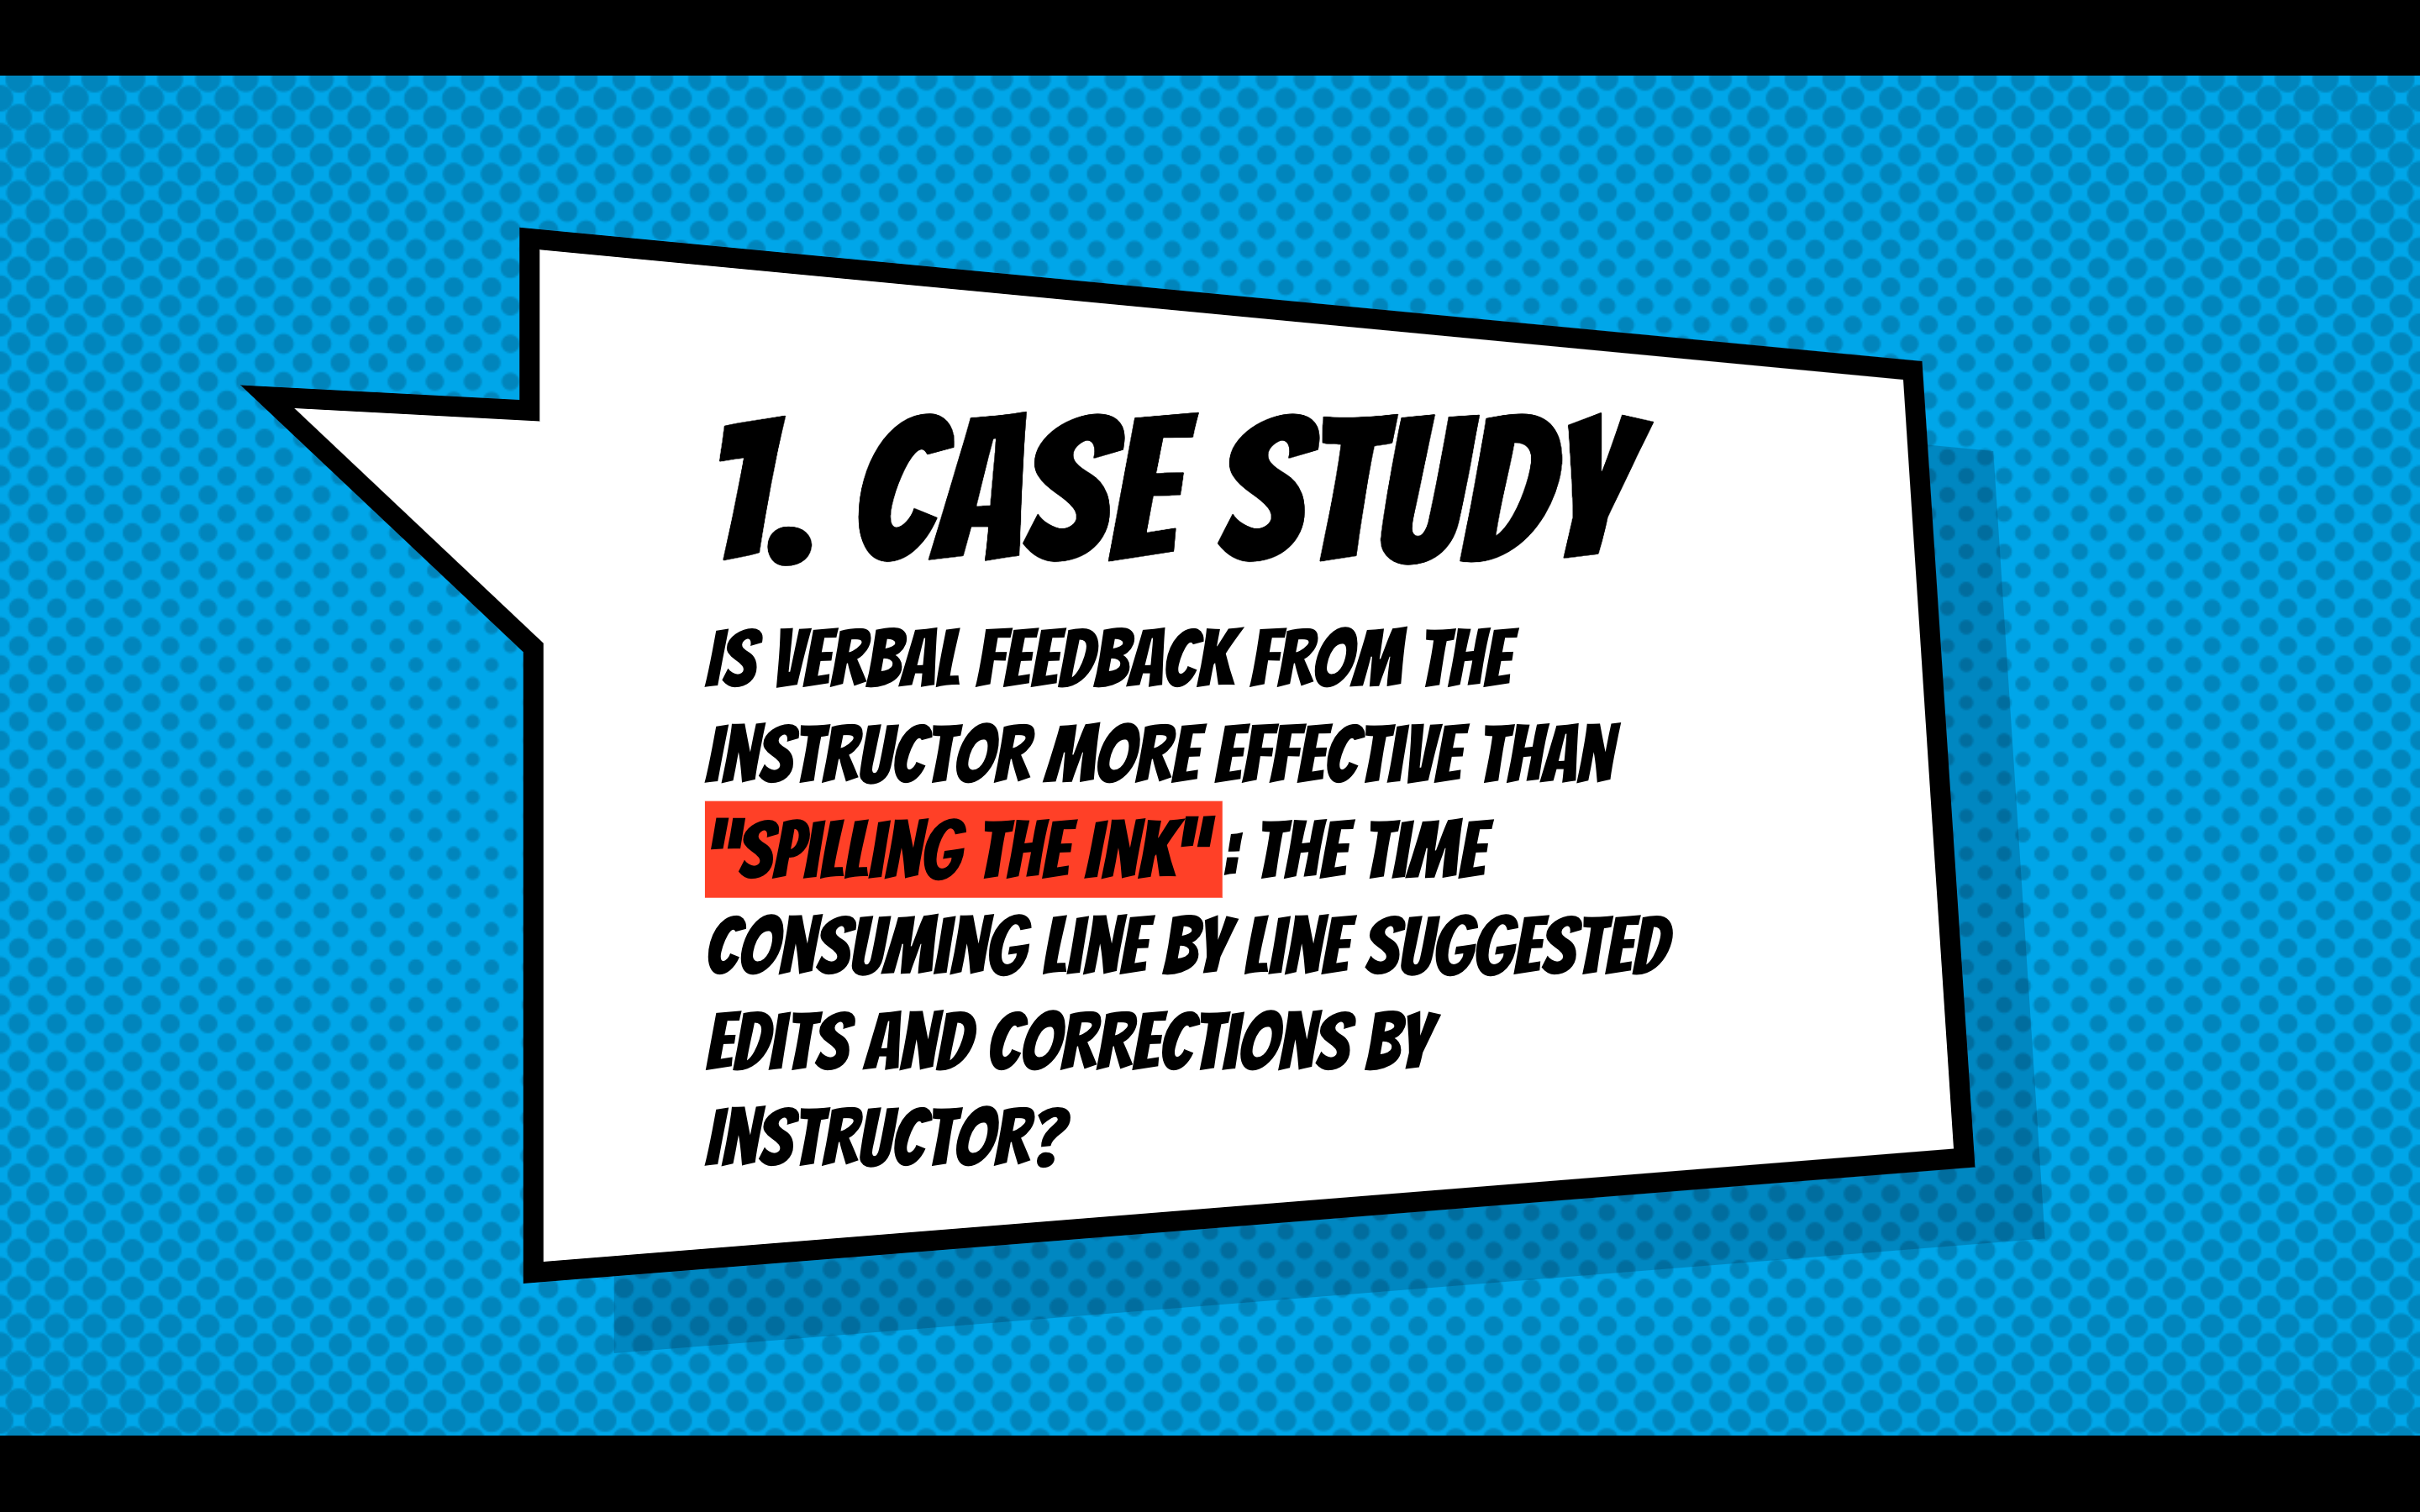 1. CAse study
Is verbal feedback from the Instructor more effective than “Spilling the Ink” : the Time consuming line by line suggested edits and corrections by Instructor?